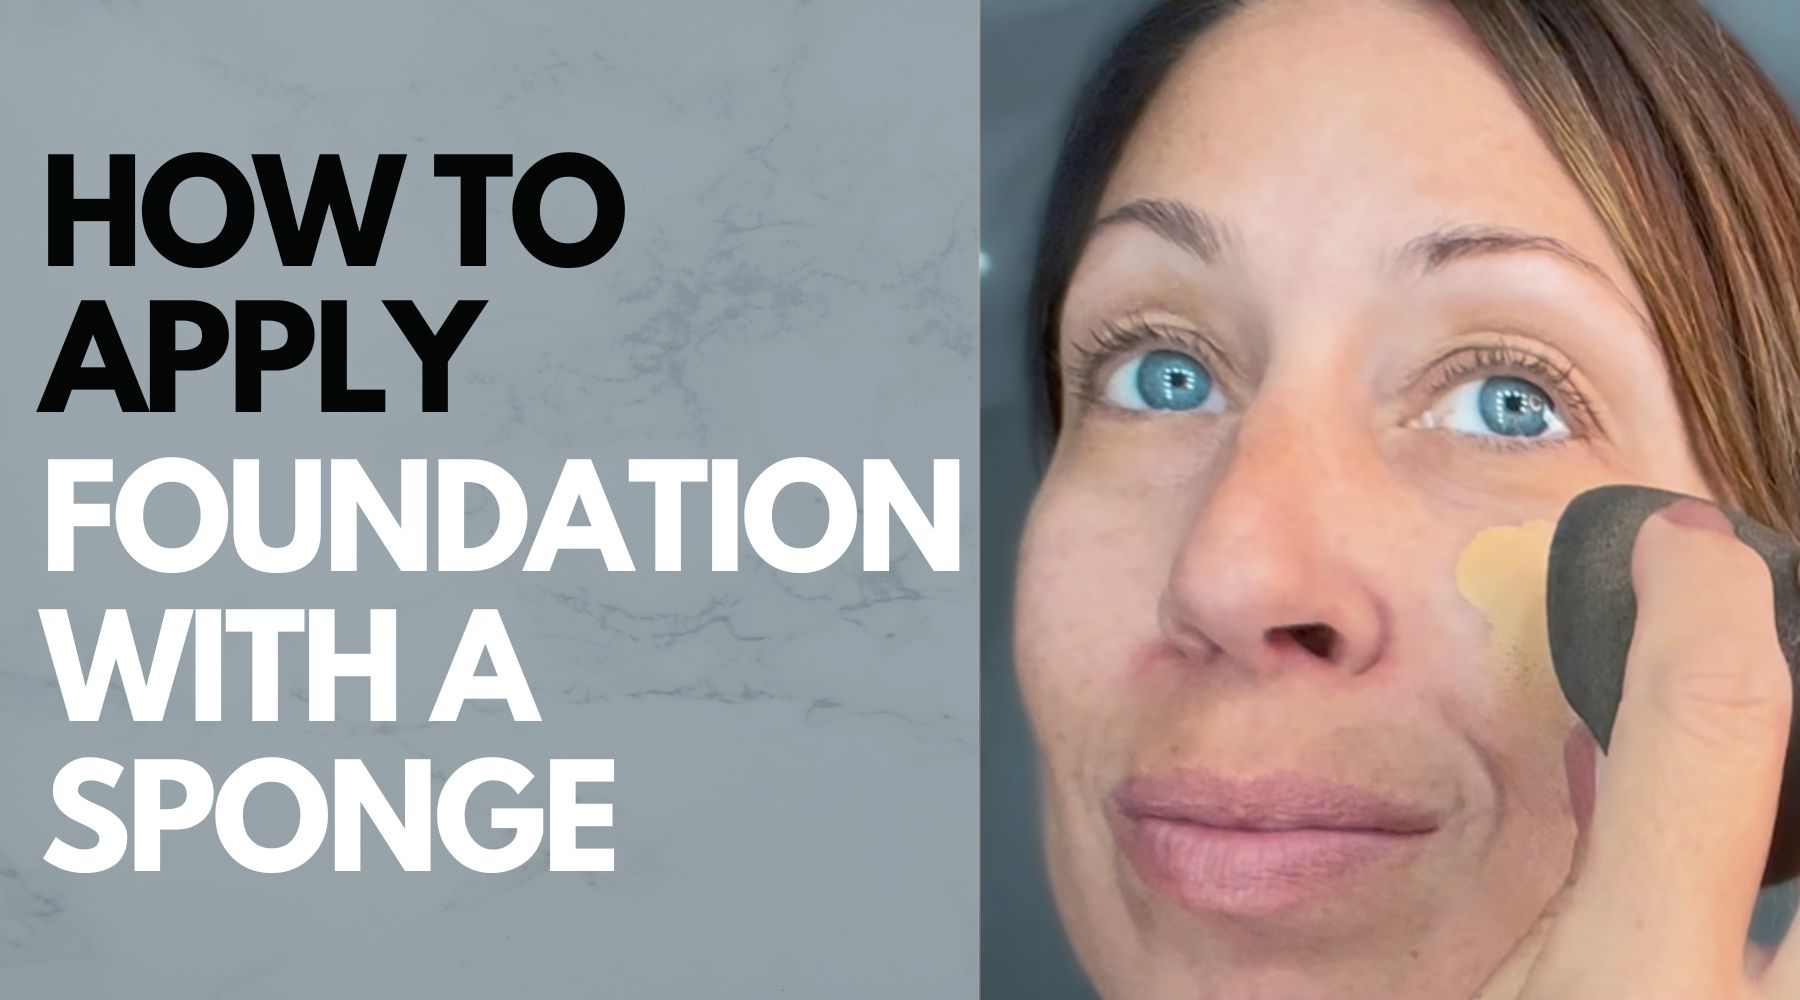 How to apply foundation with a sponge